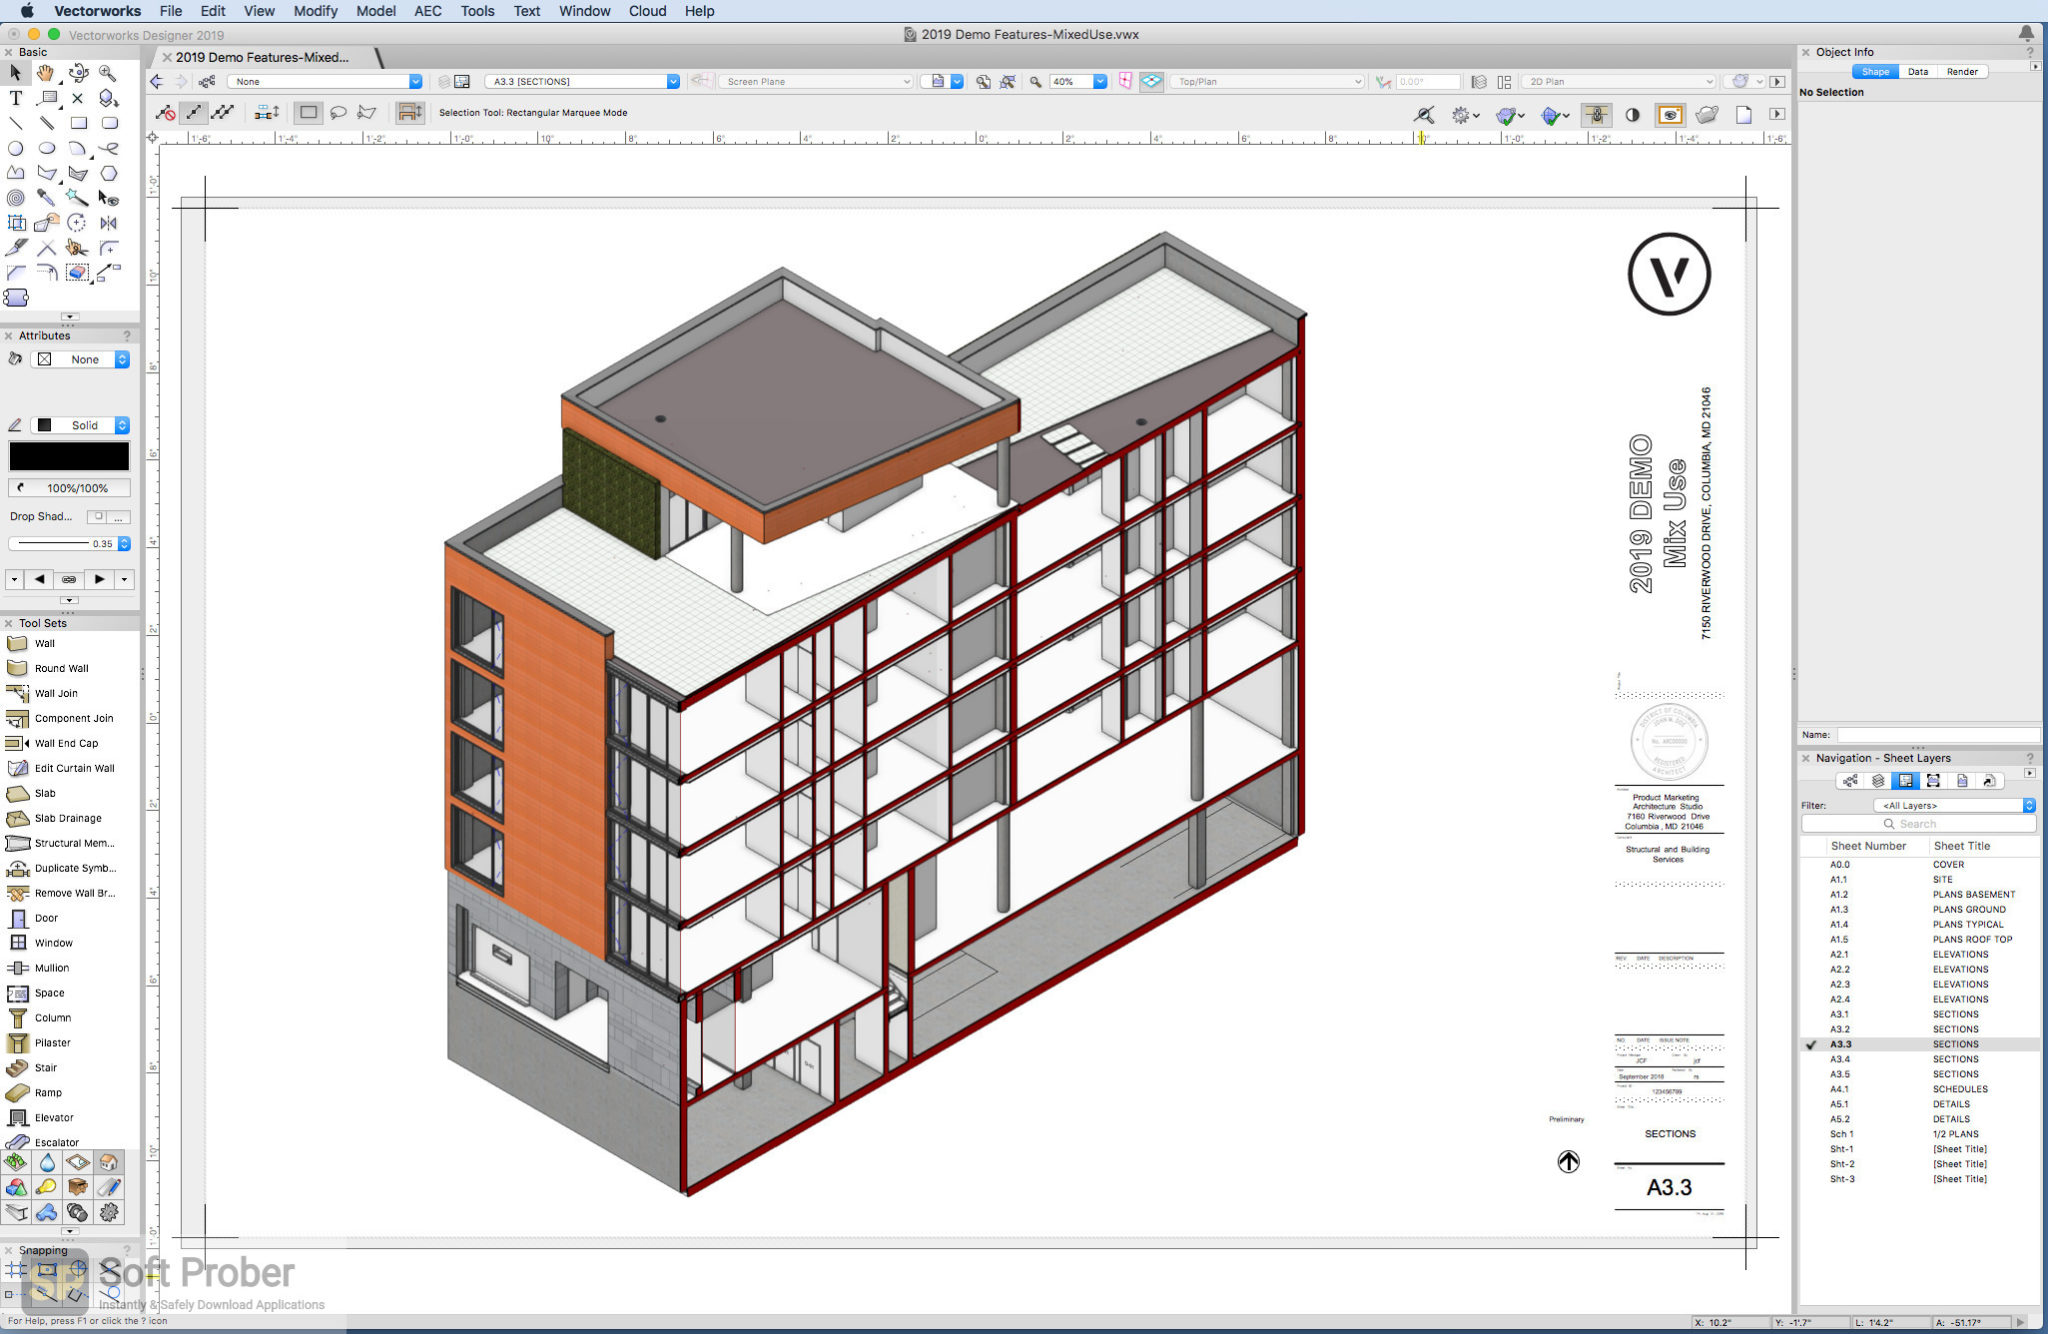 vectorworks system requirements